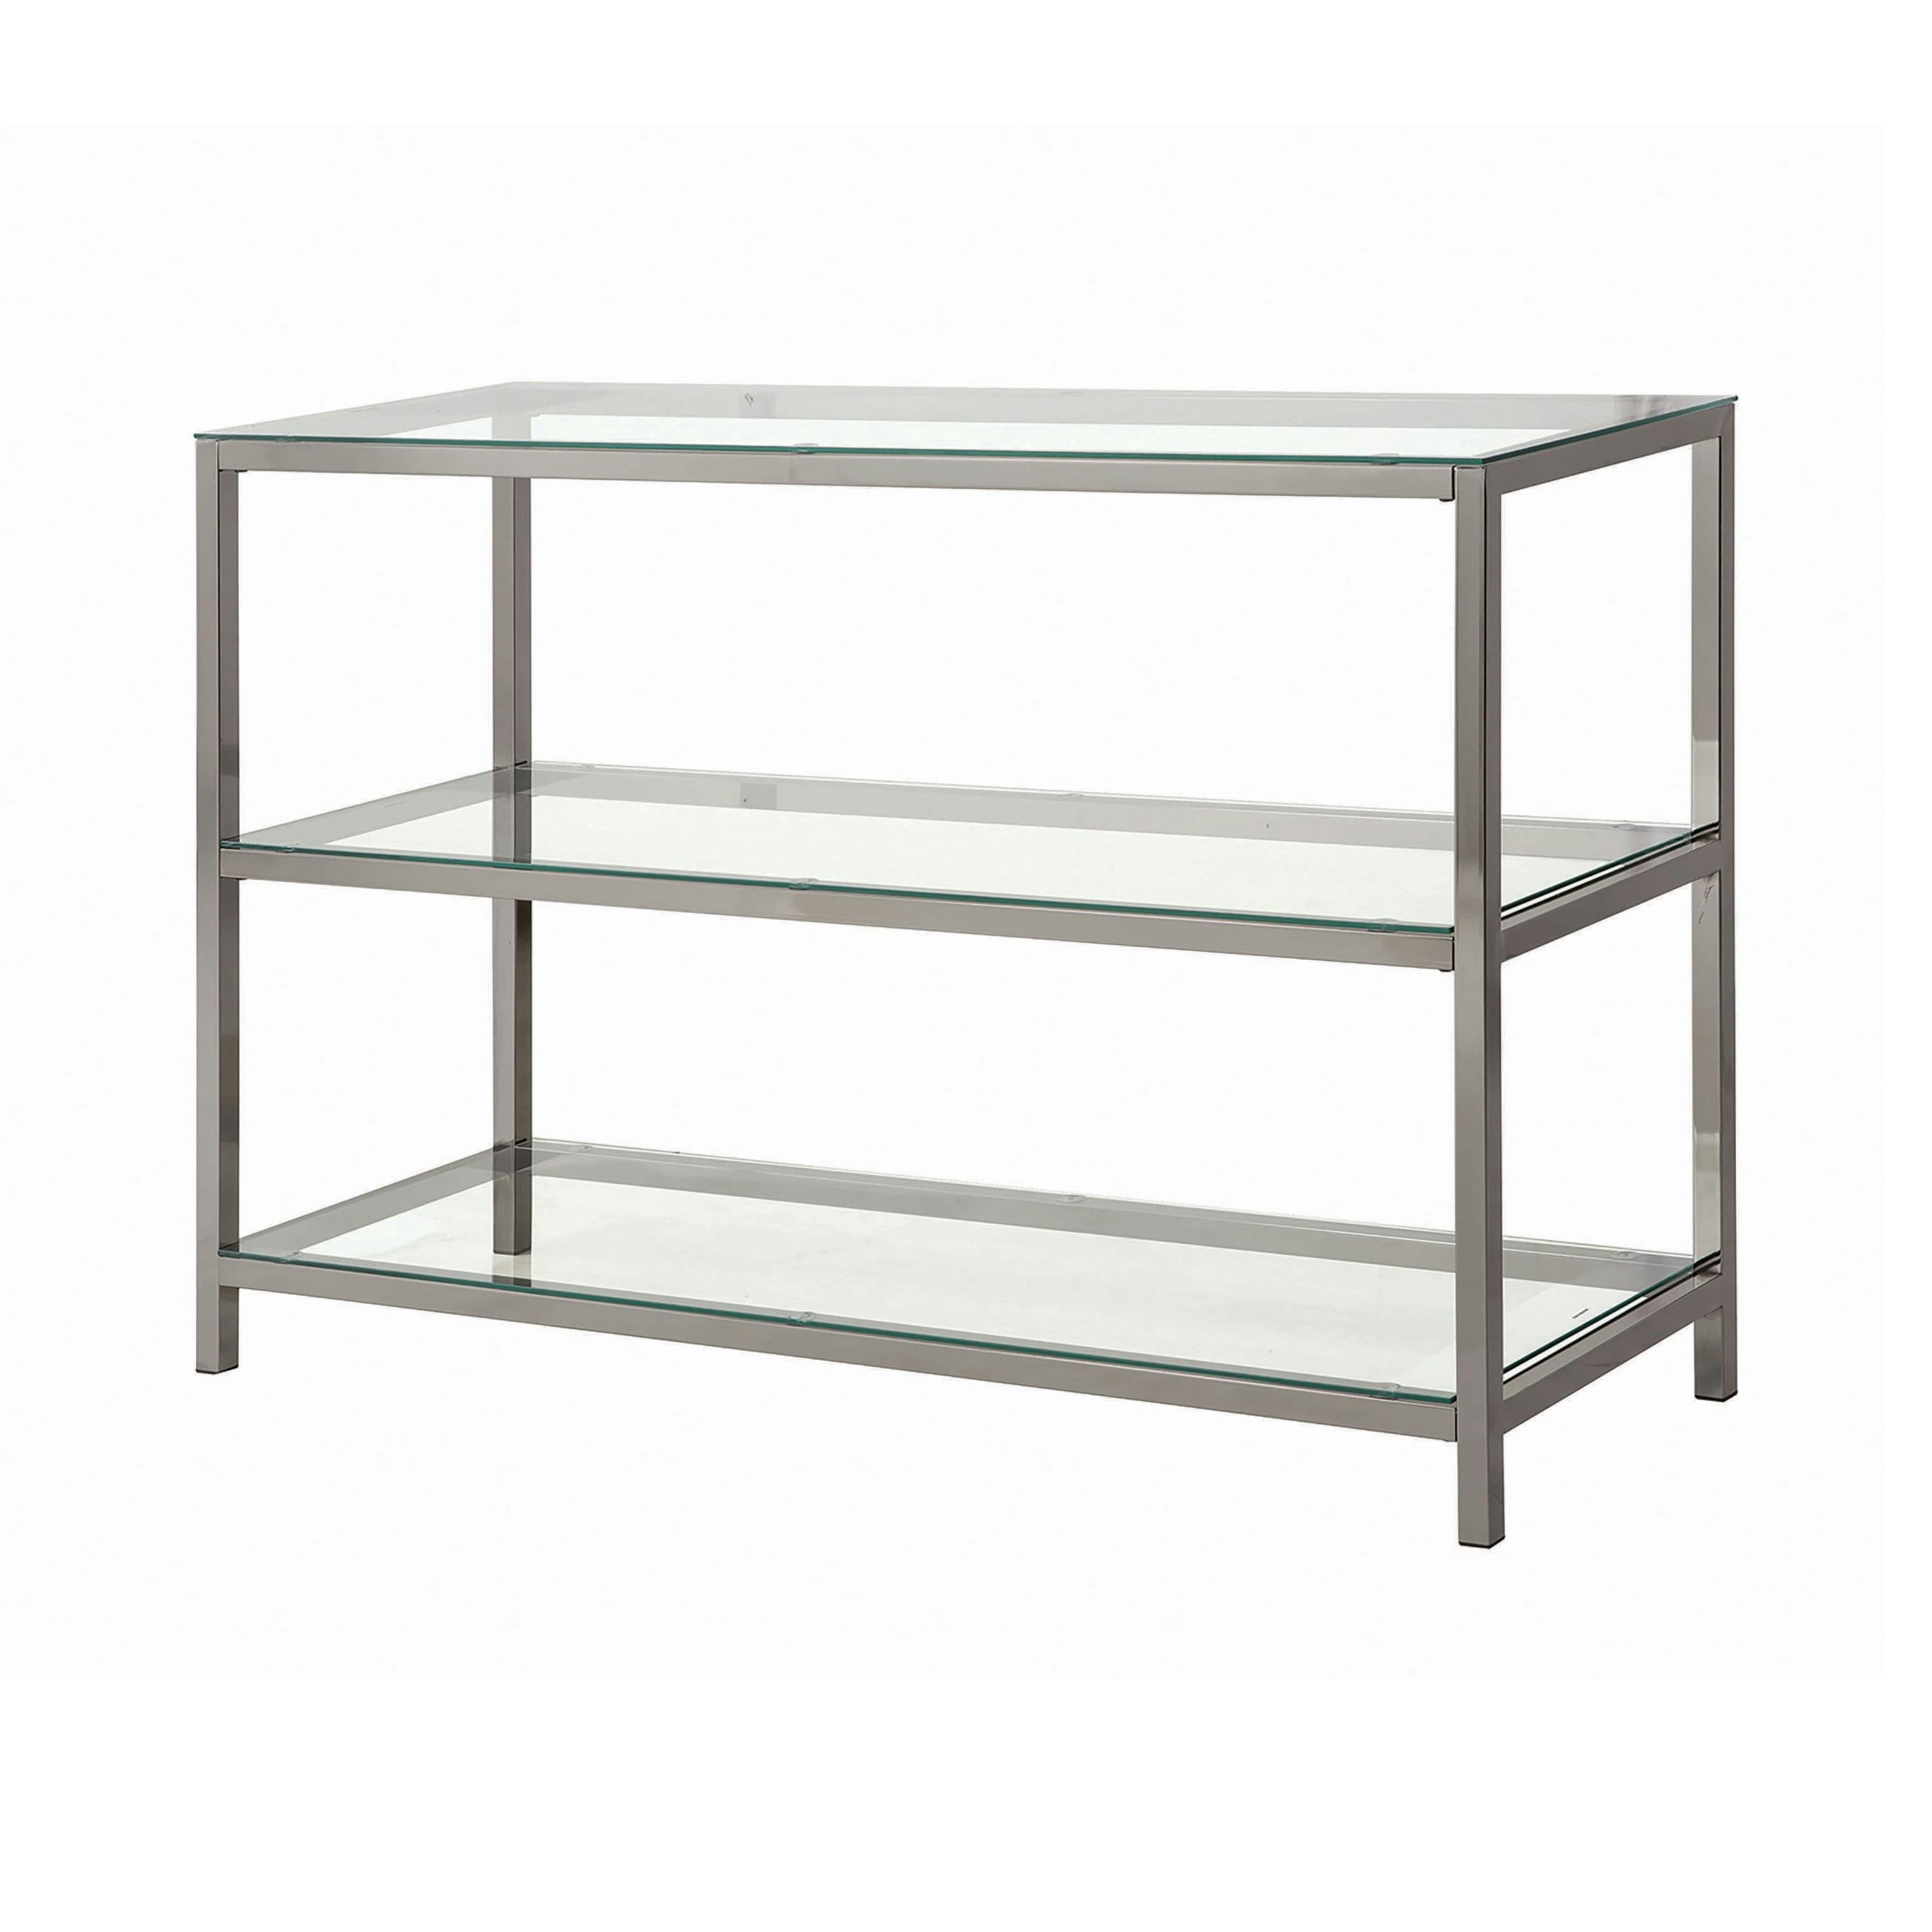 Contemporary Silver Metal & Glass Sofa Table with Storage Shelves